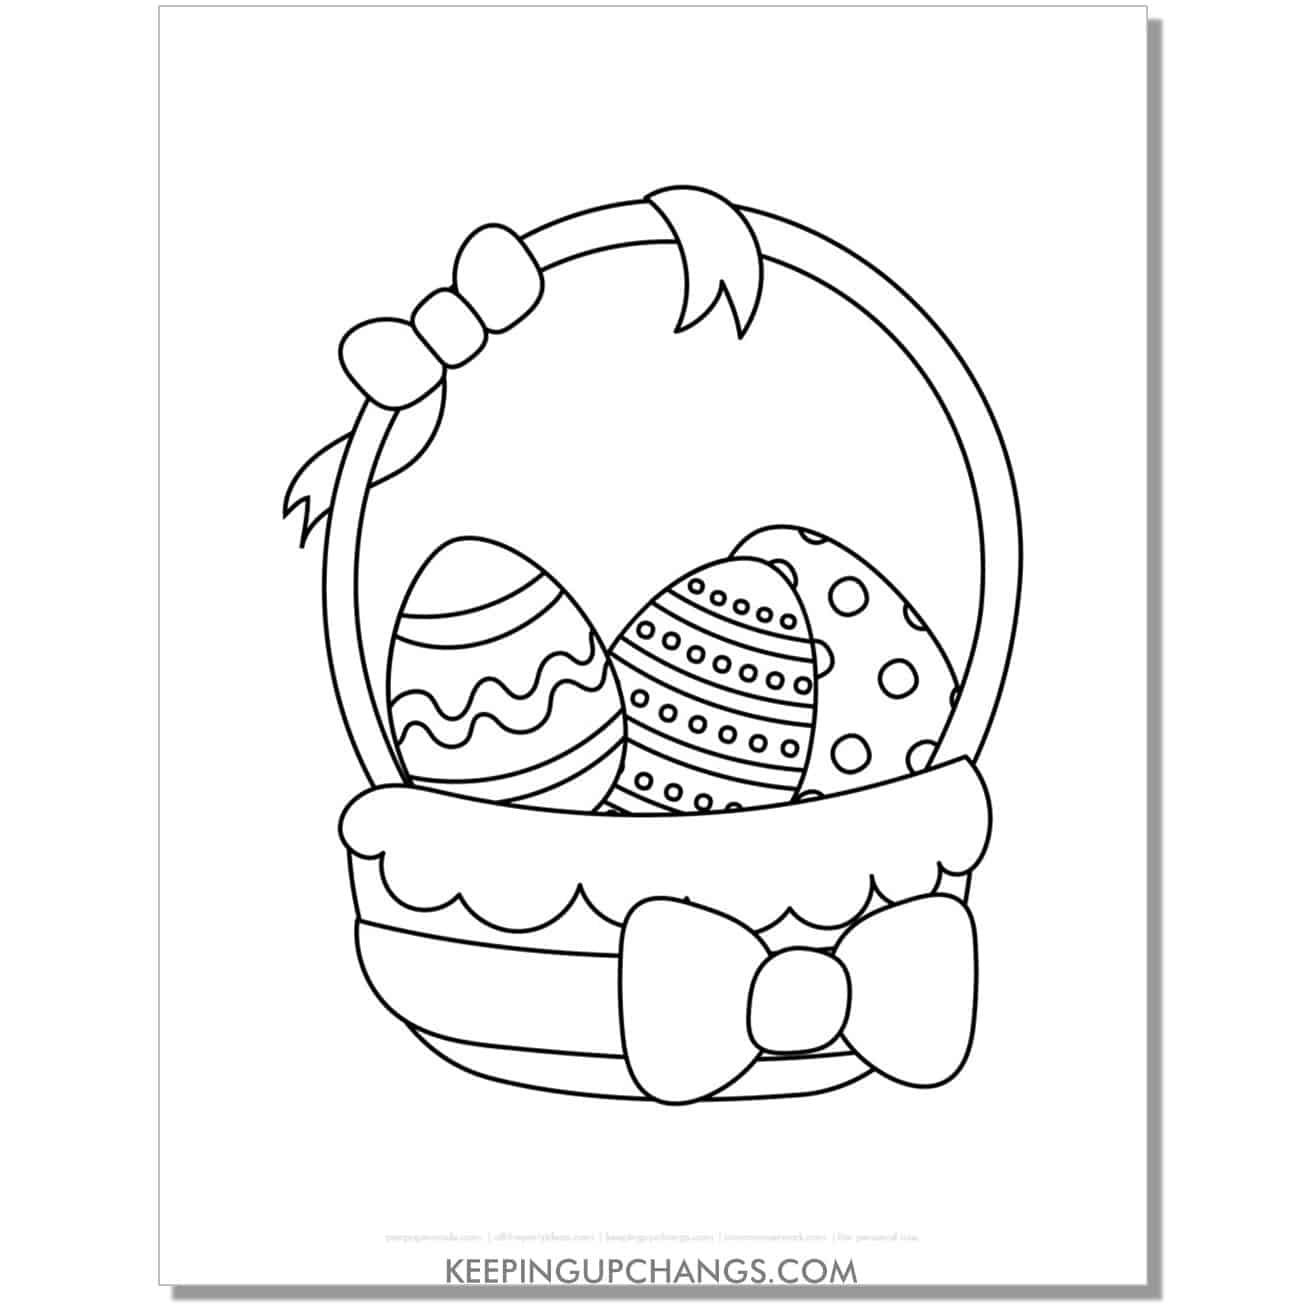 Easter basket with swirly, spotted, and patterned eggs coloring page, sheet.